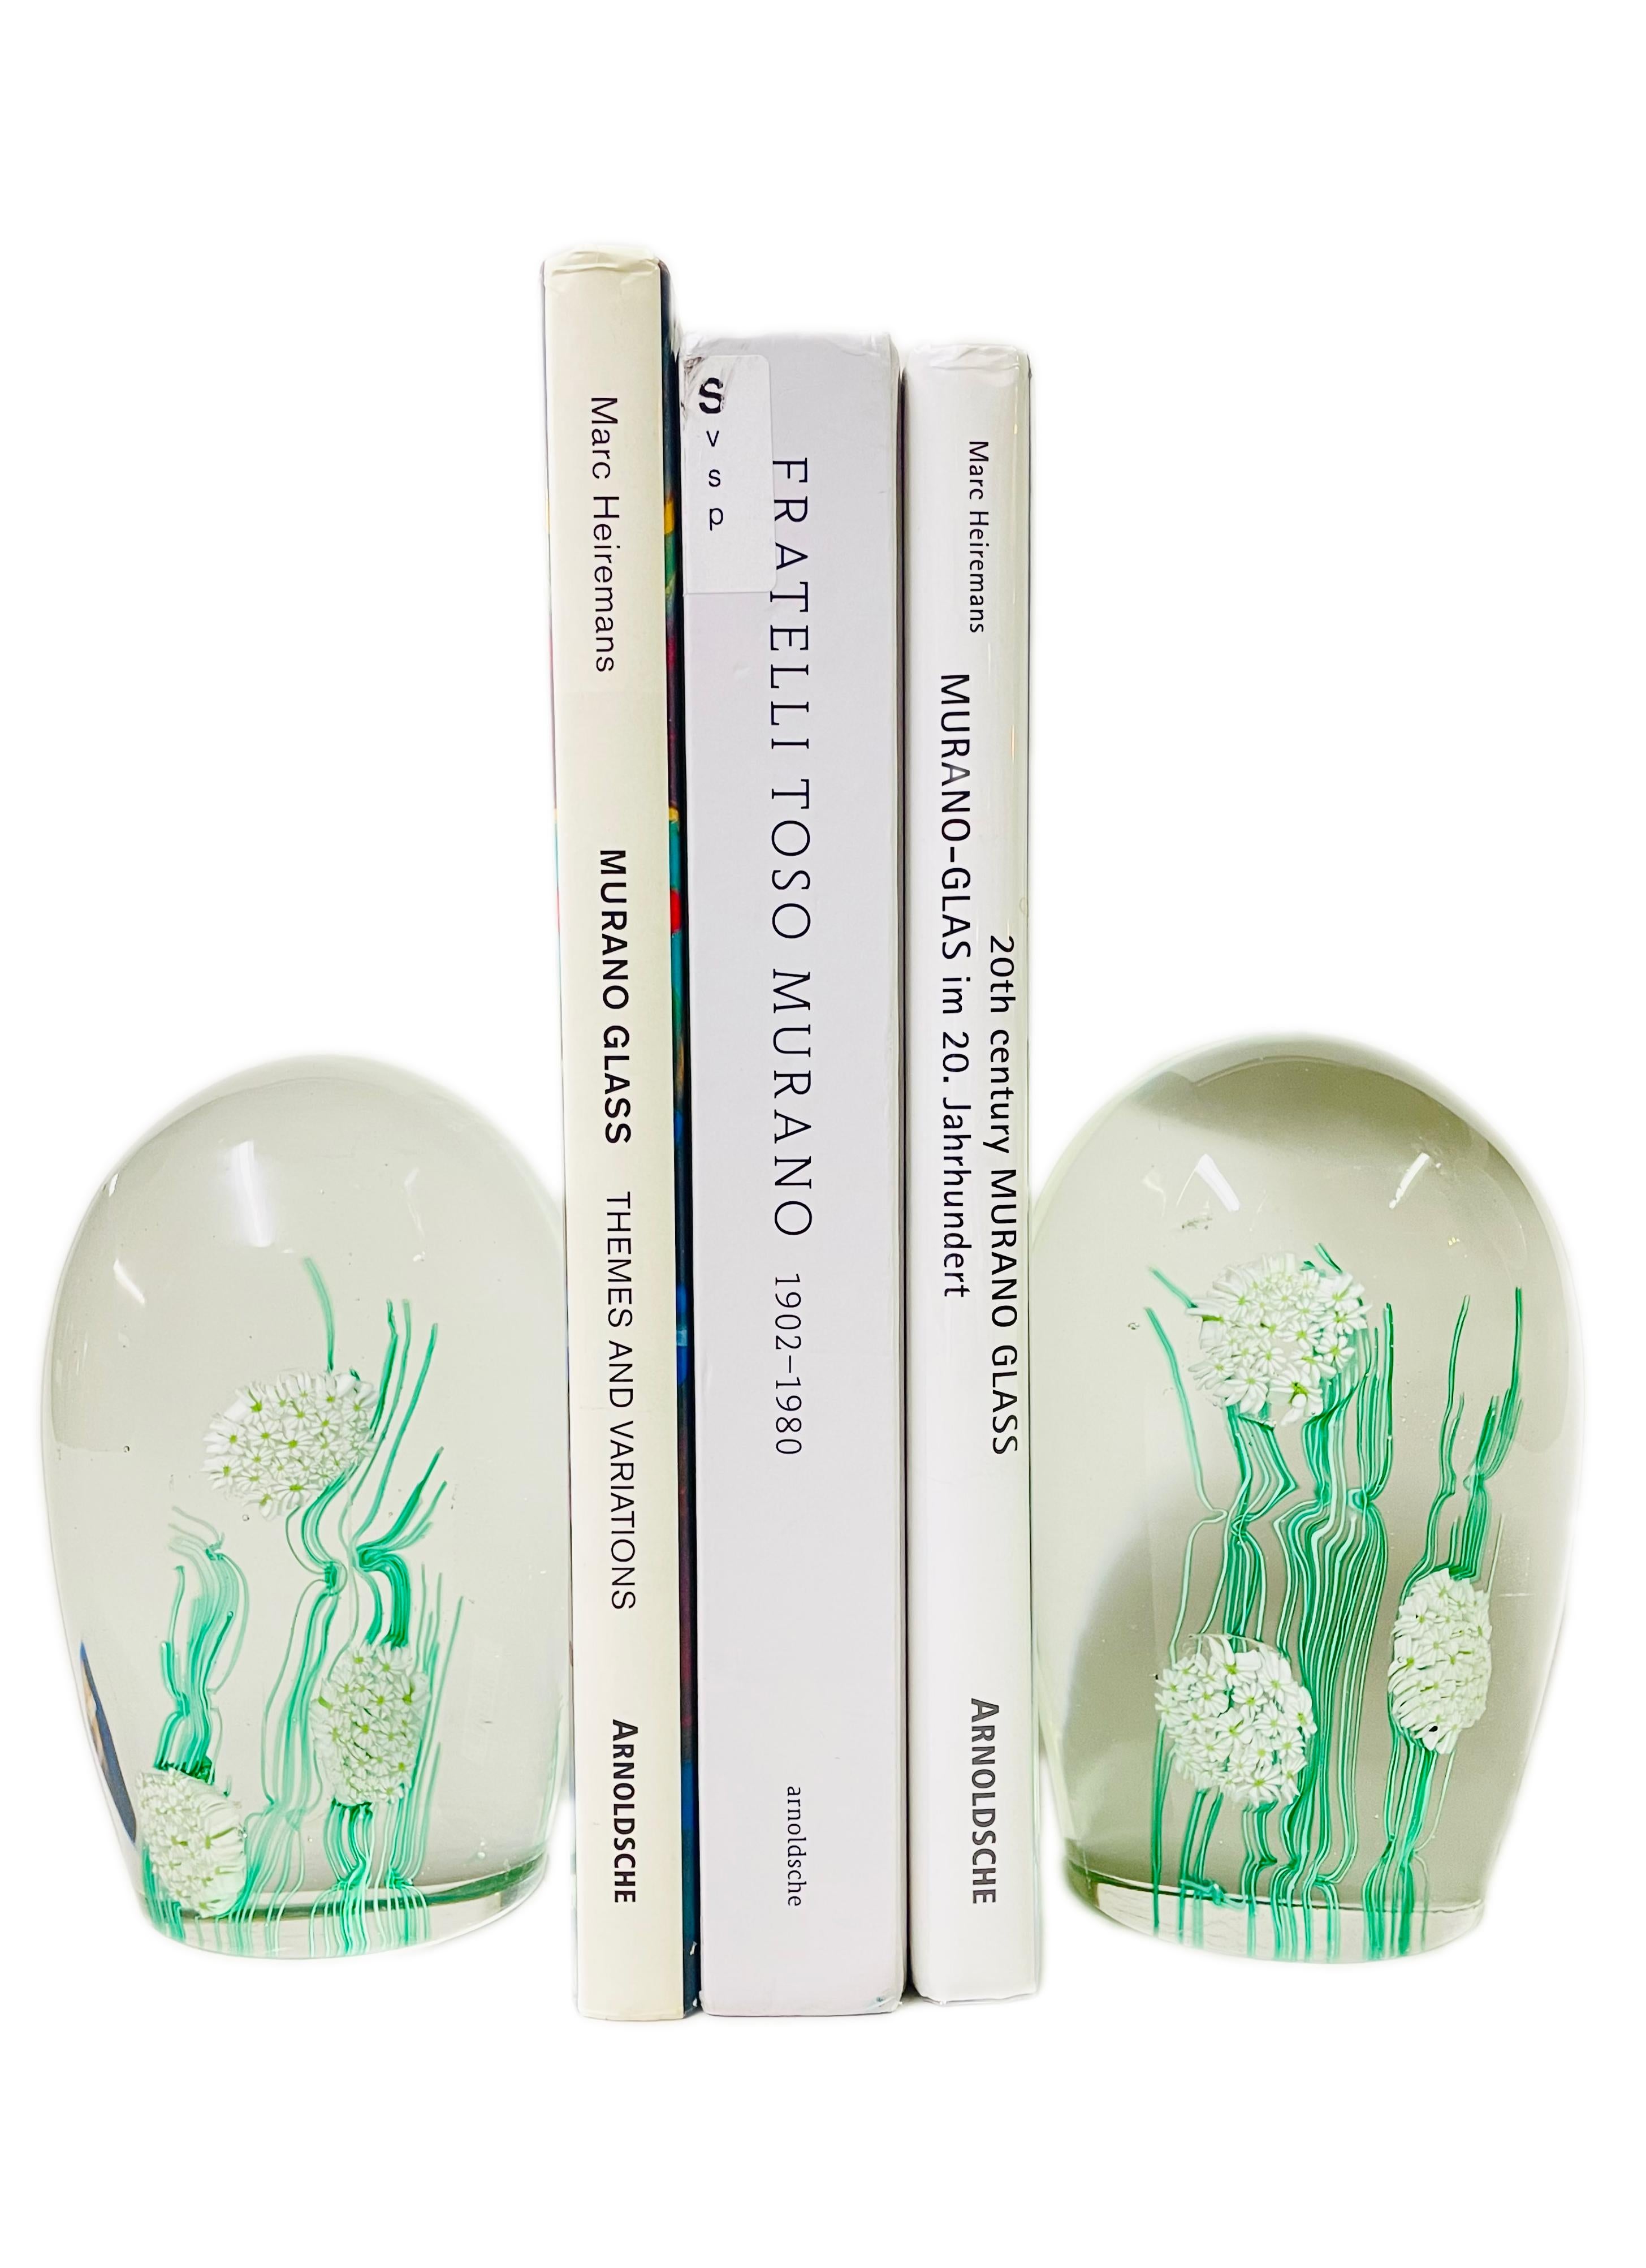 A Mid-Century Modern pair of Italian art glass bookends each decorated with Millefiori decoration of white flora and green leaf & vine cased in heavy clear glass in the form of bookends. The bookends are unsigned - circa 1970s - Murano, Italy